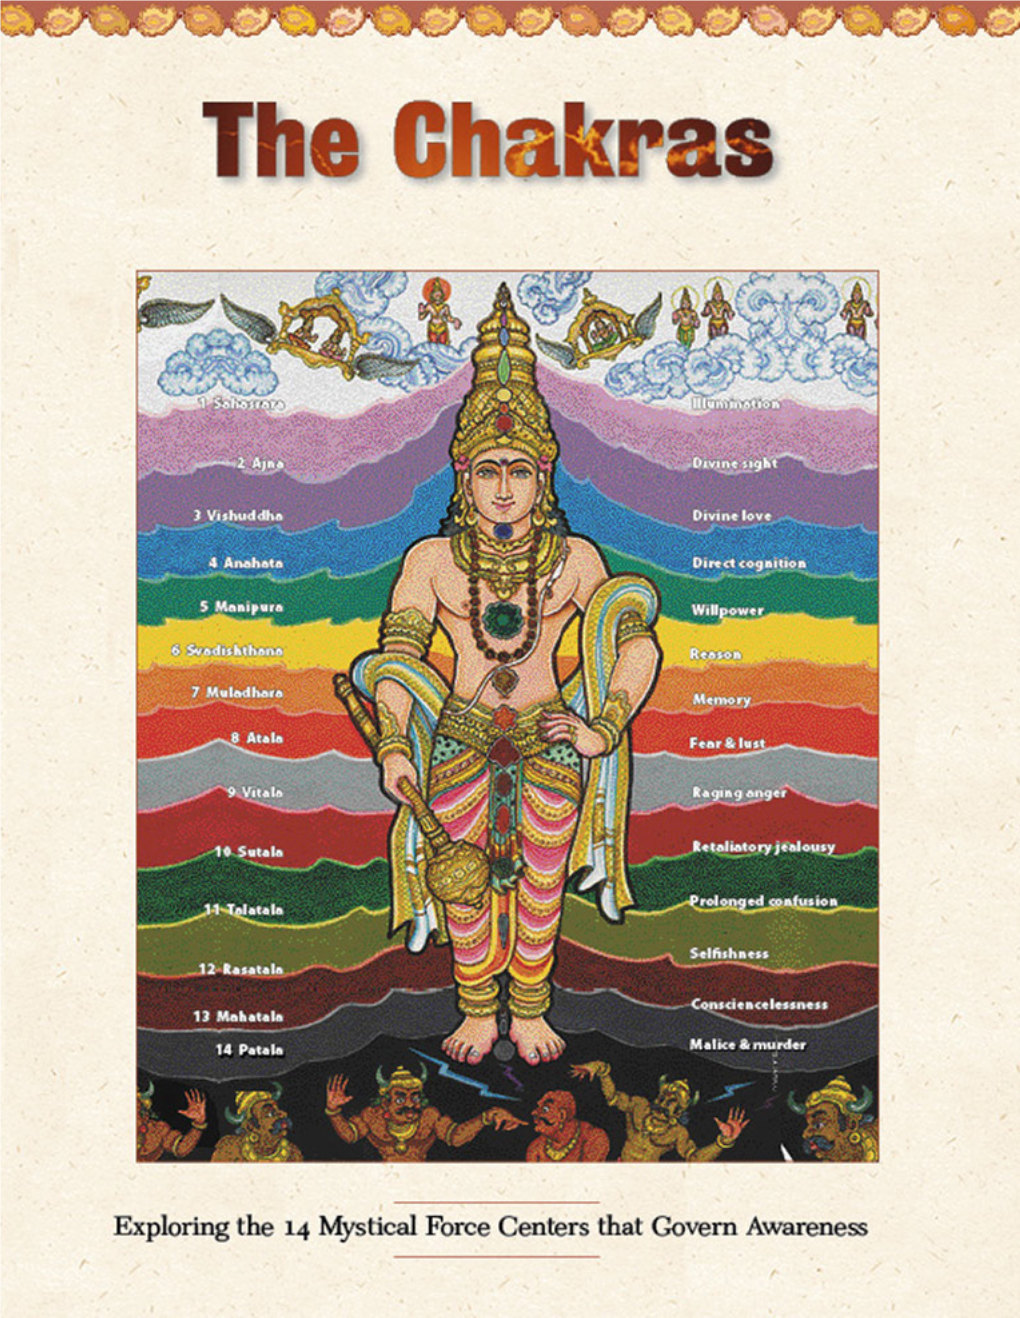 The Chakras Are Shown in Their Locations Within the Inner Bodies of Man, Along with the Attribute of Each Force Center